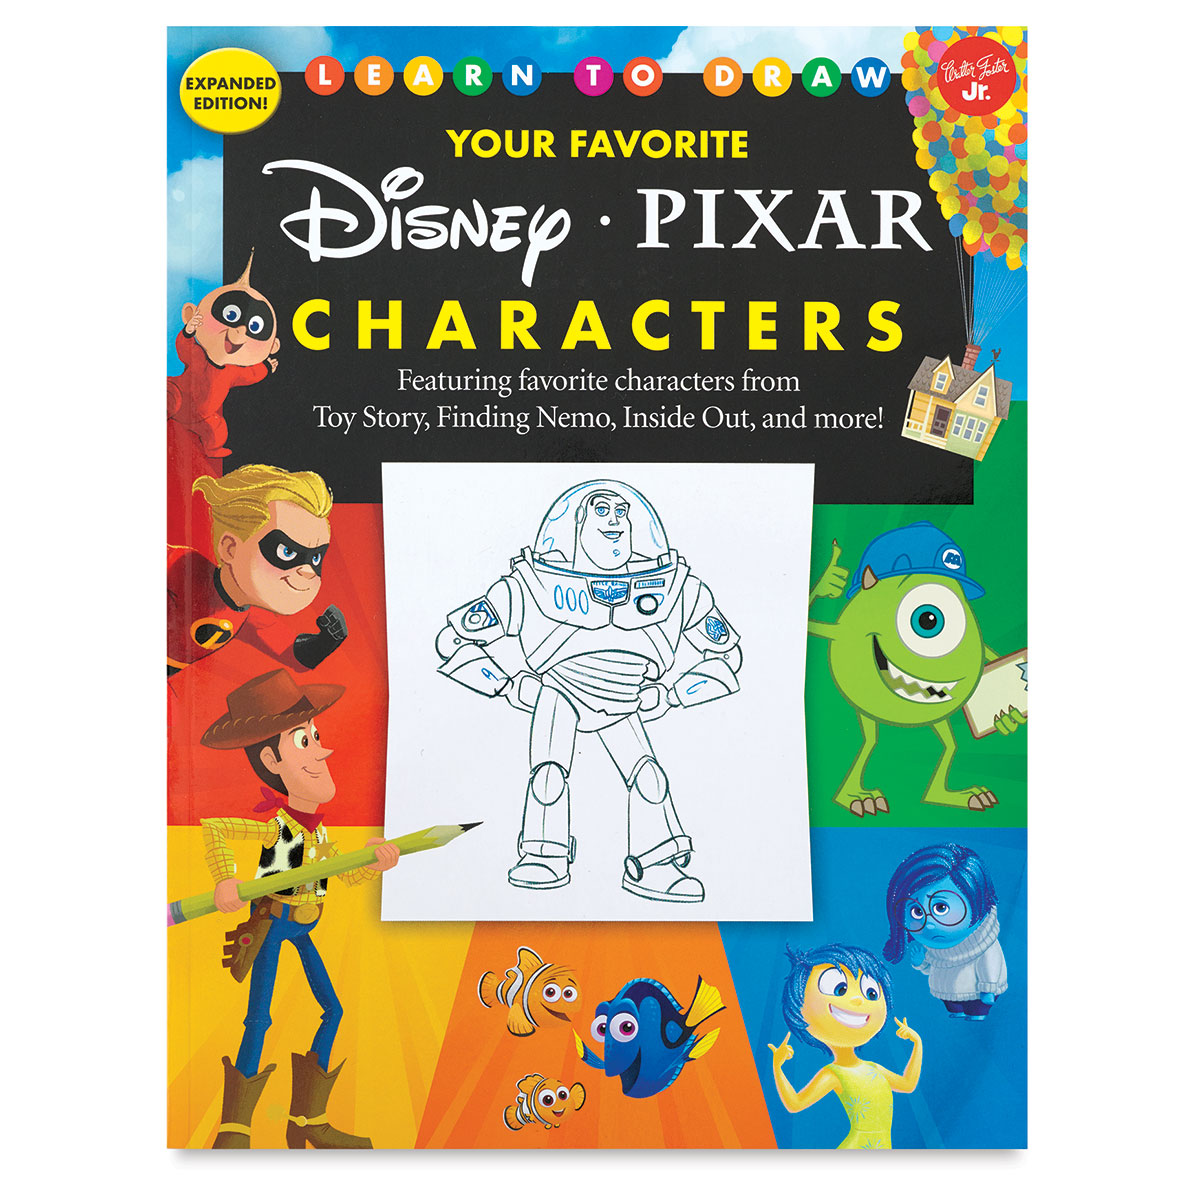 Learn to Draw Your Favorite Disney Pixar Characters Expanded Edition